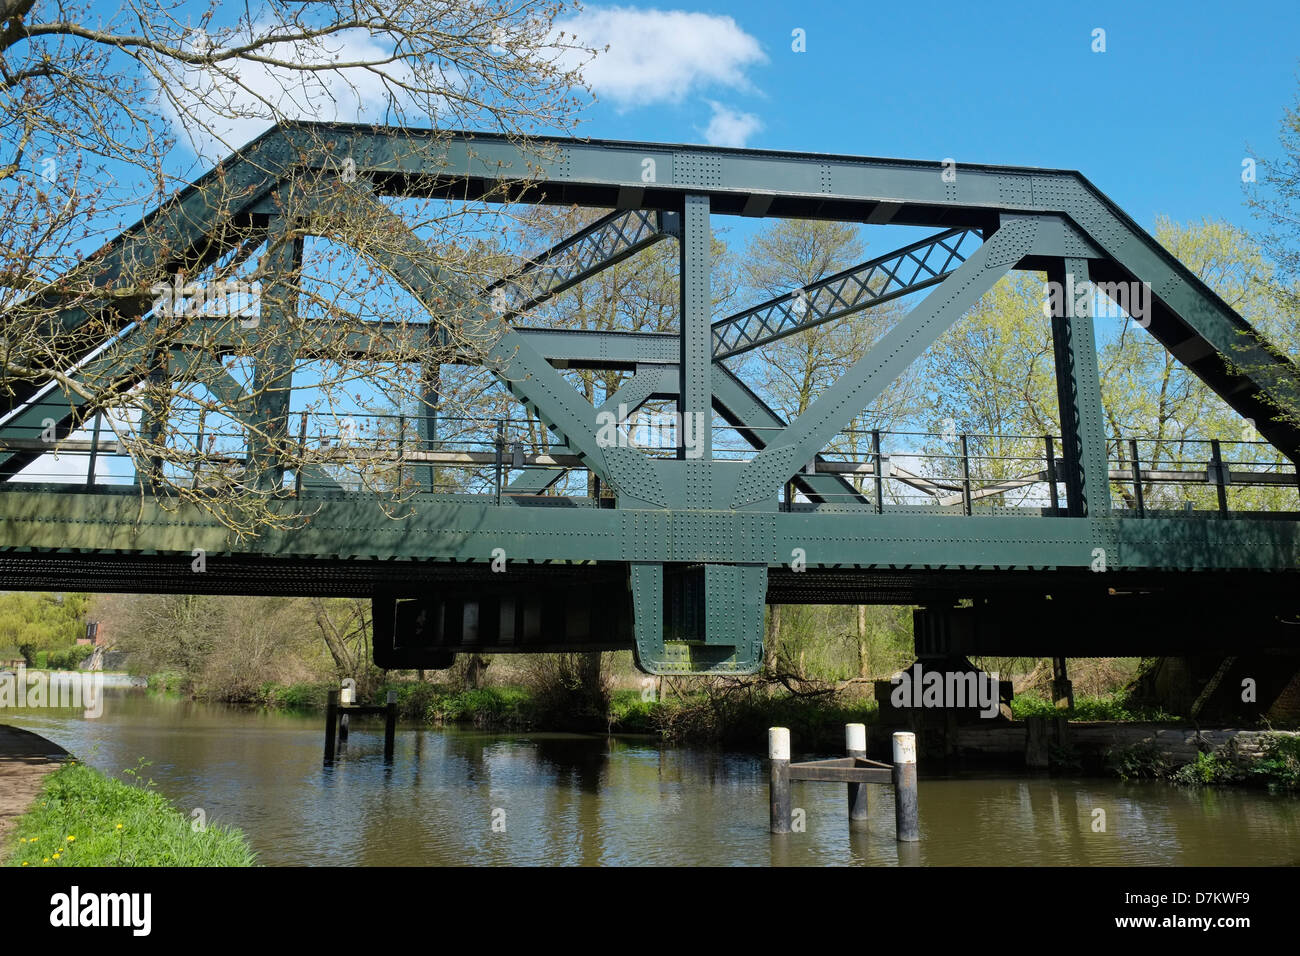 A railway bridge over the River Wey Navigation, between Guildford and Godalming, Surrey, England. Stock Photo